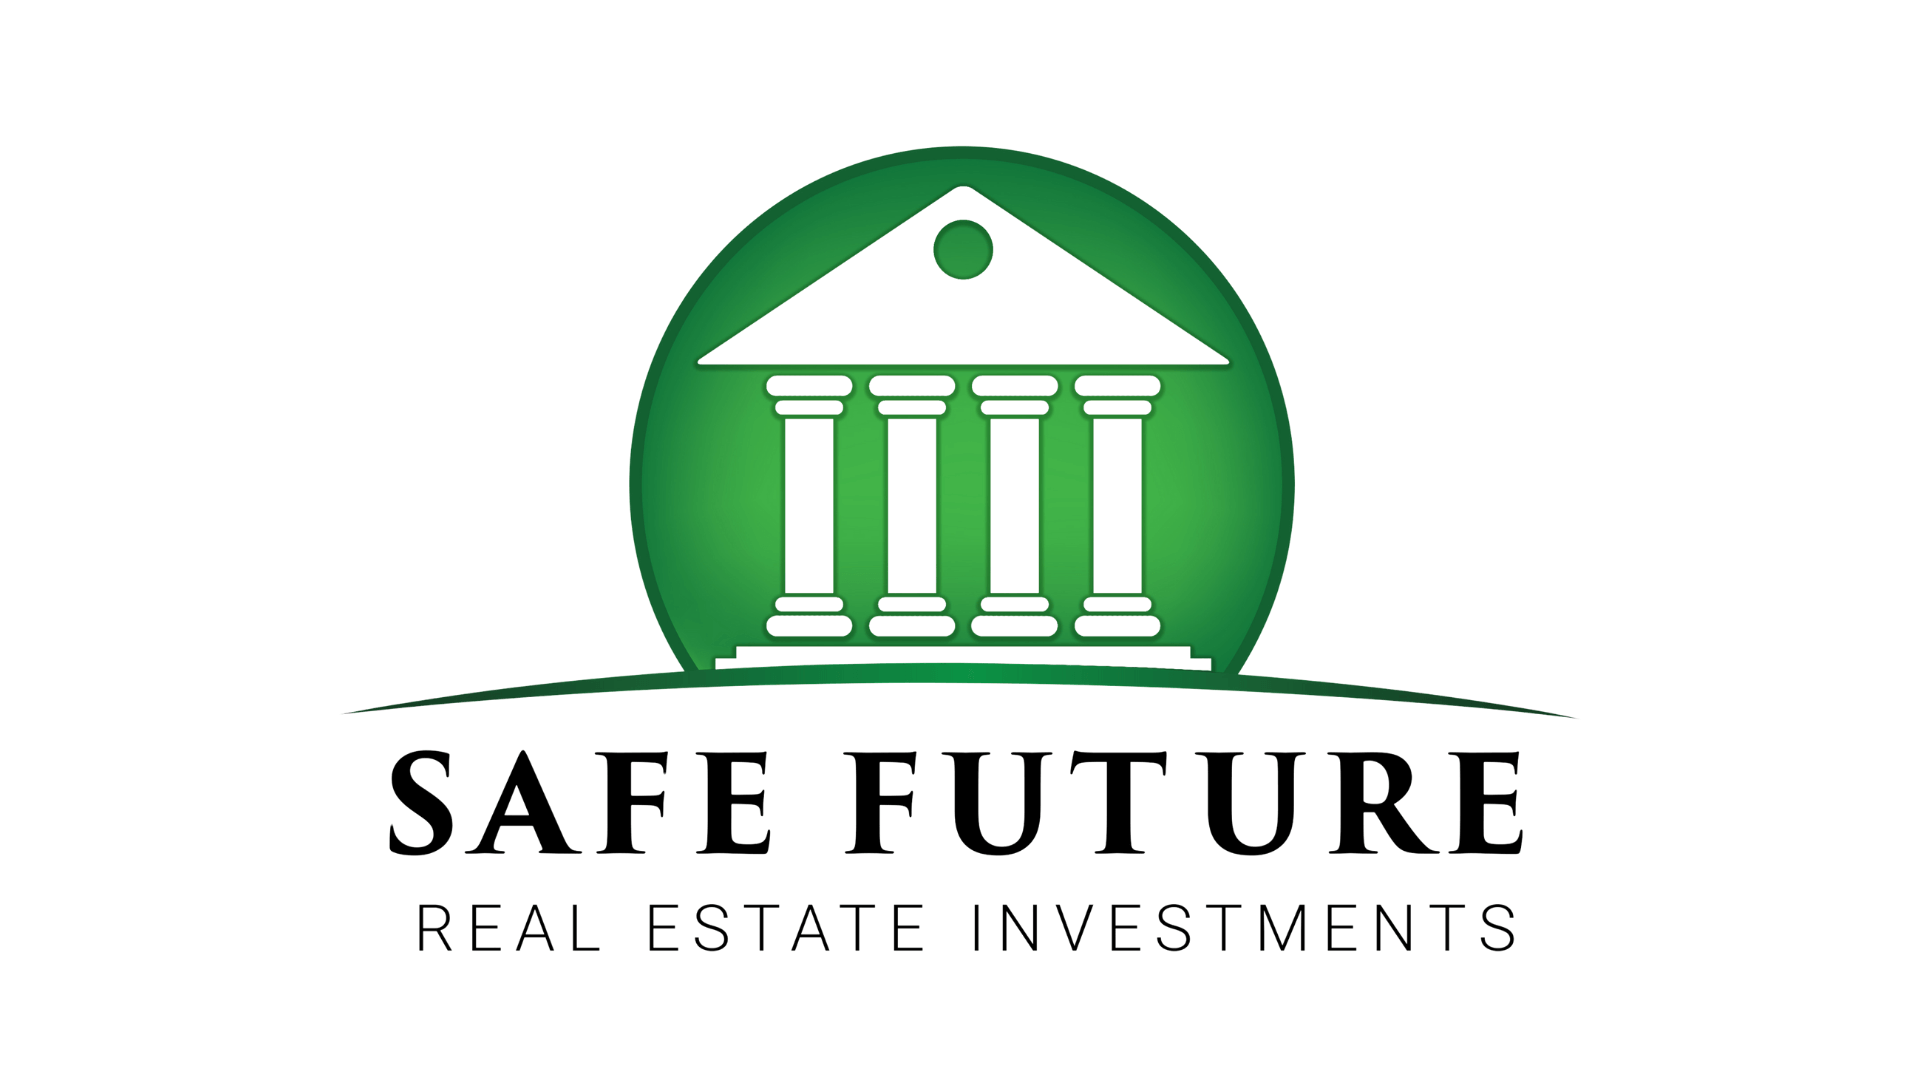 Safe Future Announces Launch of RV Resort Project in Tennessee, USA